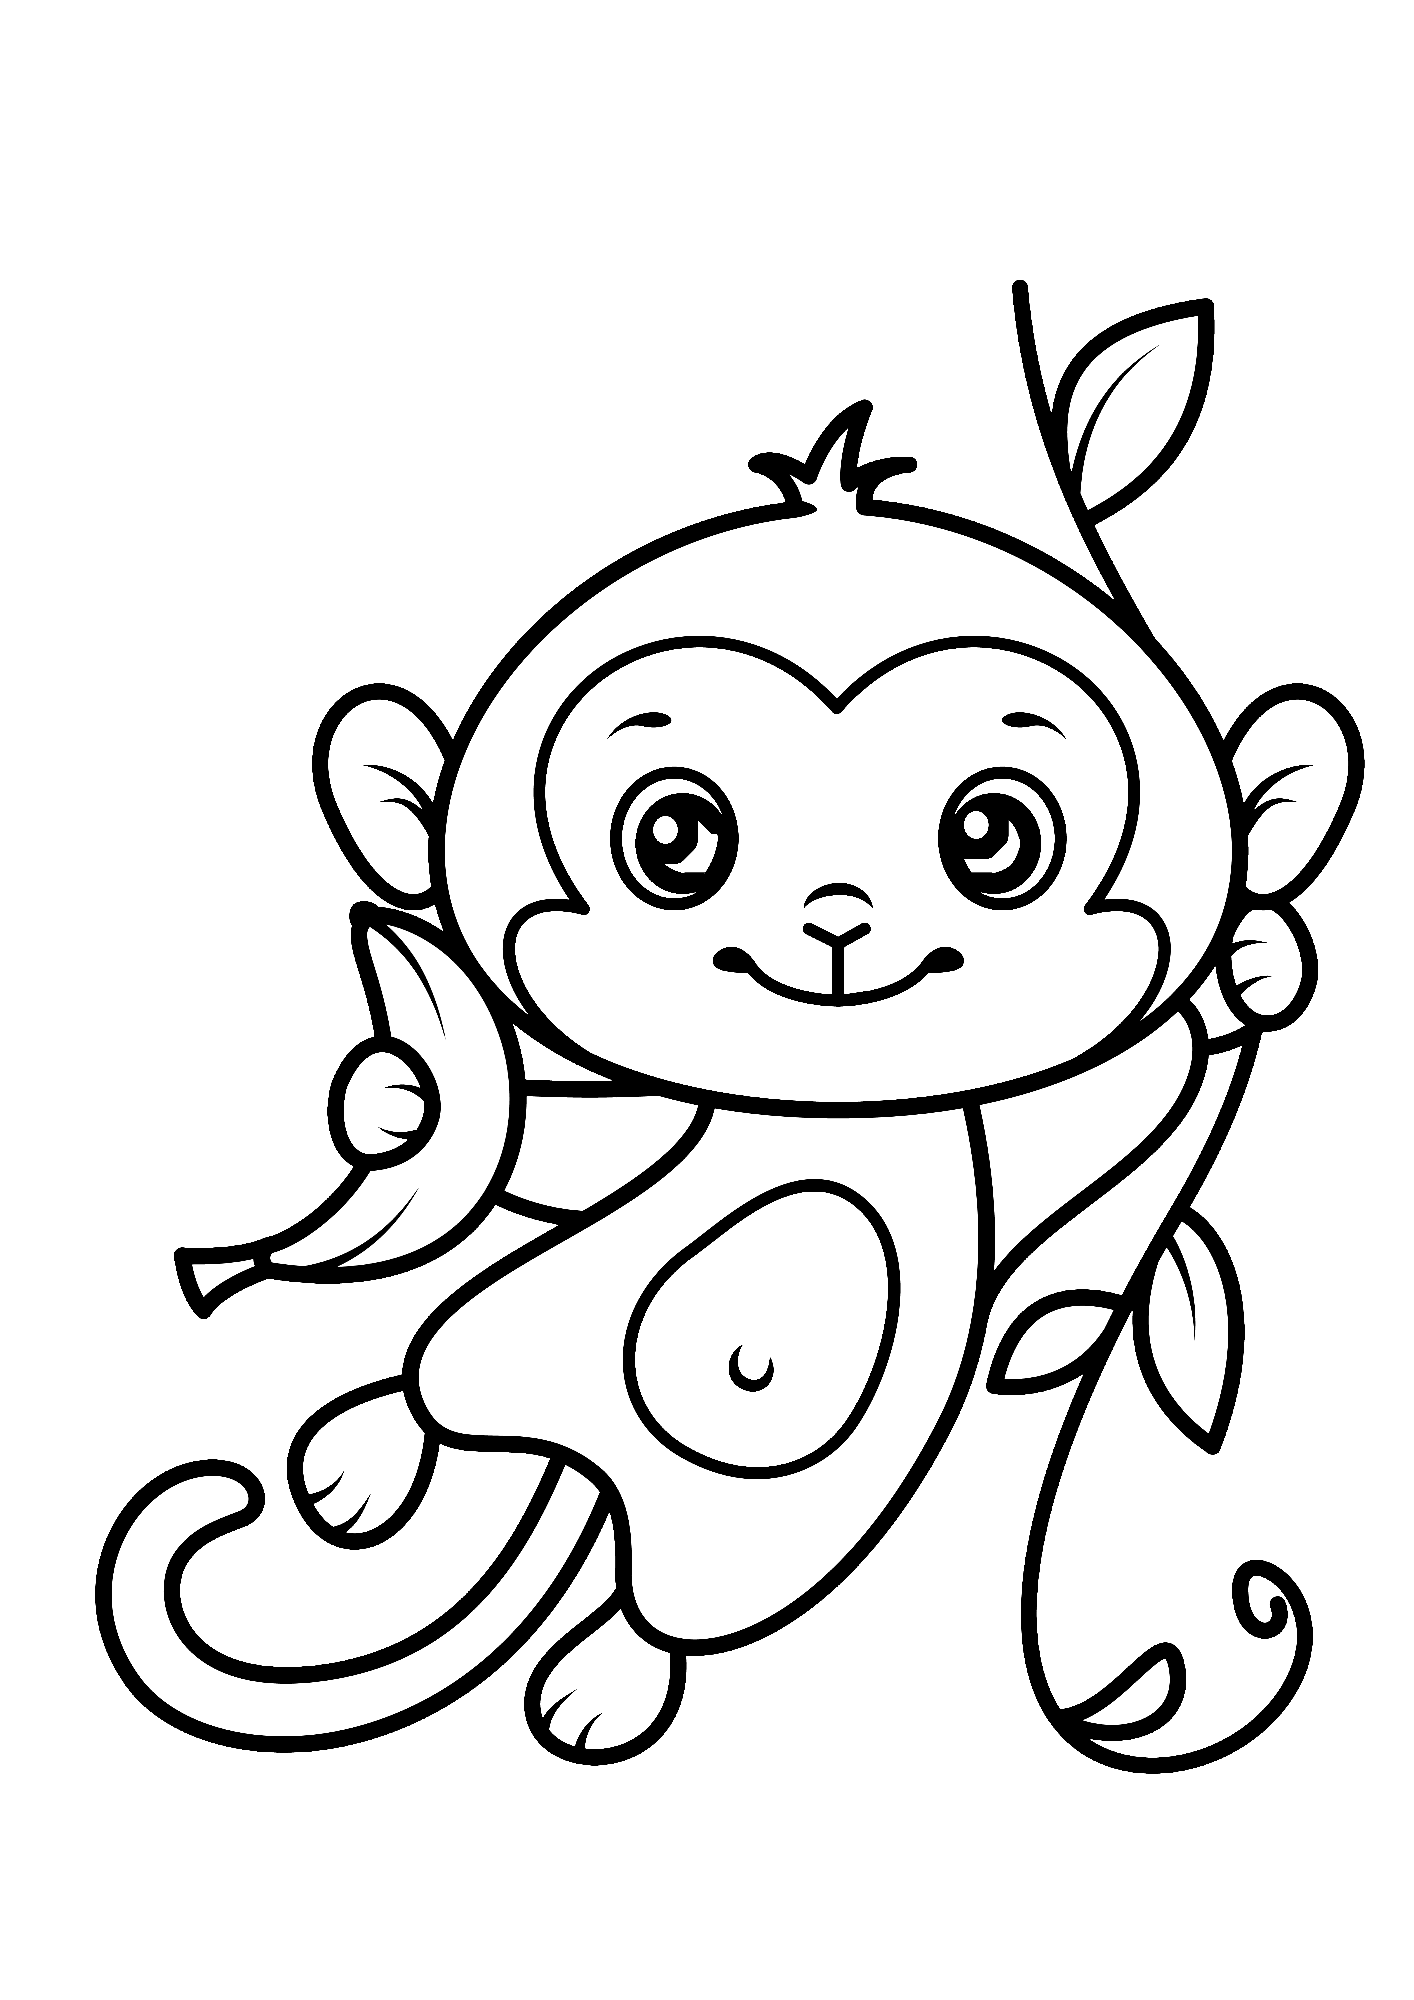 Fruit Bananas Coloring Pages